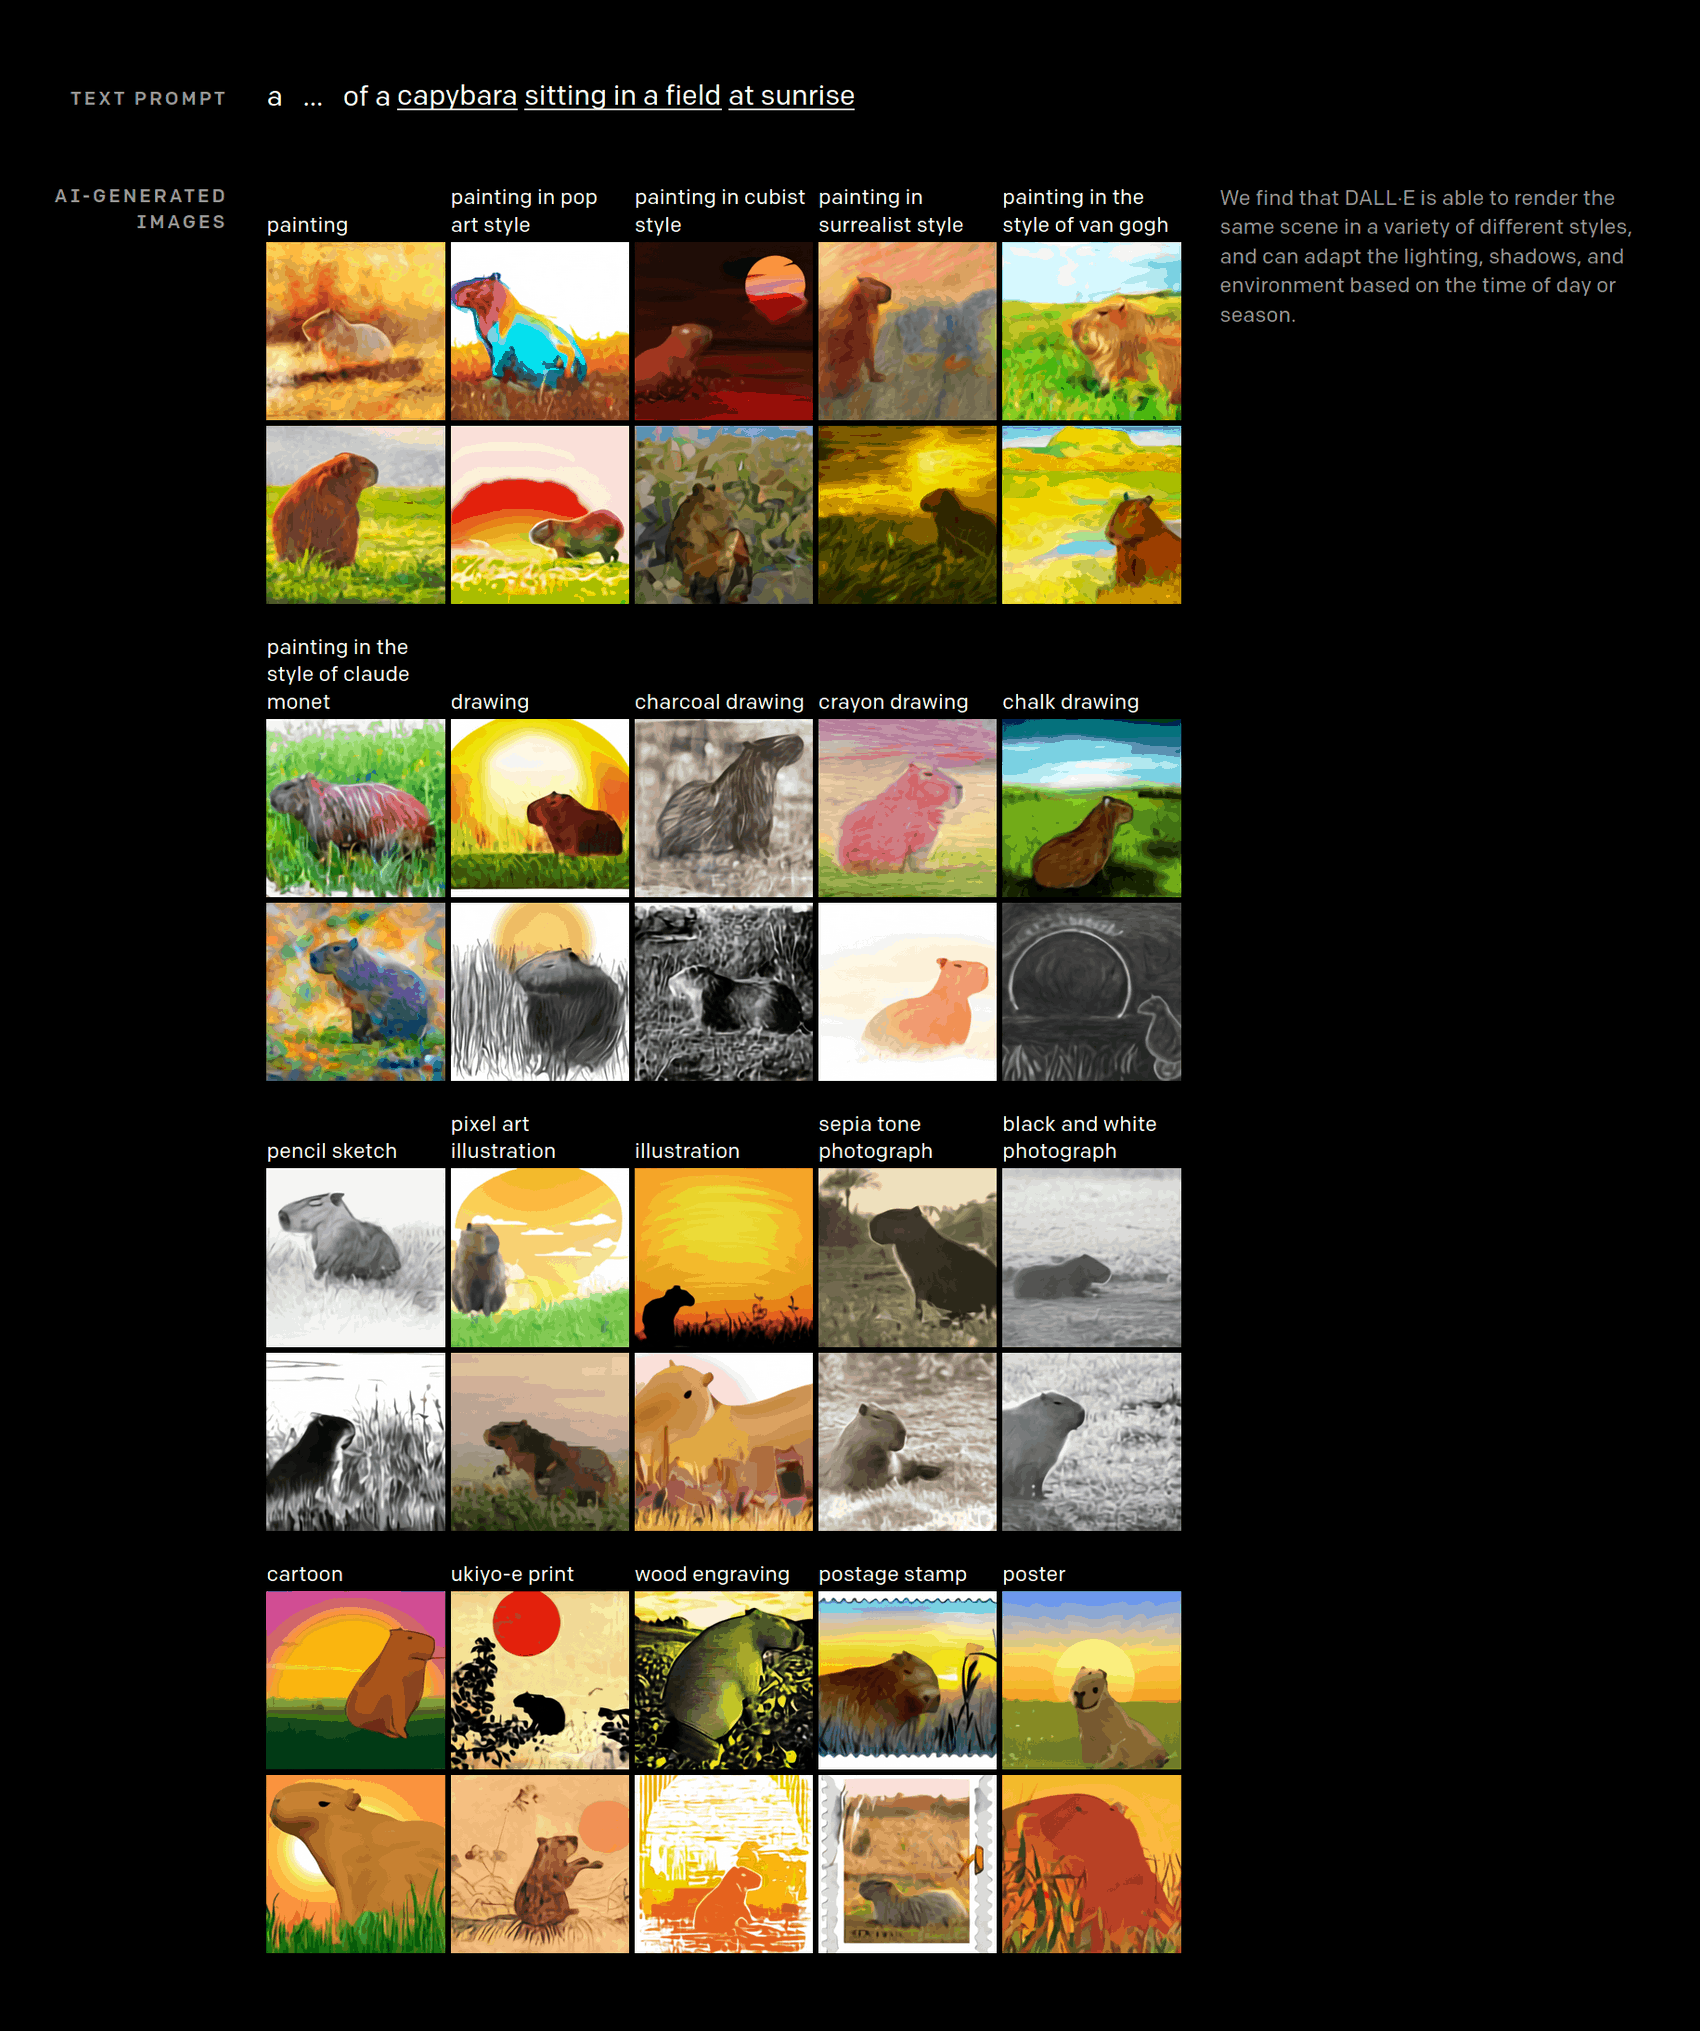 We find that DALL·E 1 is able to render the same scene in a variety of different styles, and can adapt the lighting, shadows, and environment based on the time of day or season: “a … of a capybara sitting in a field at sunrise”